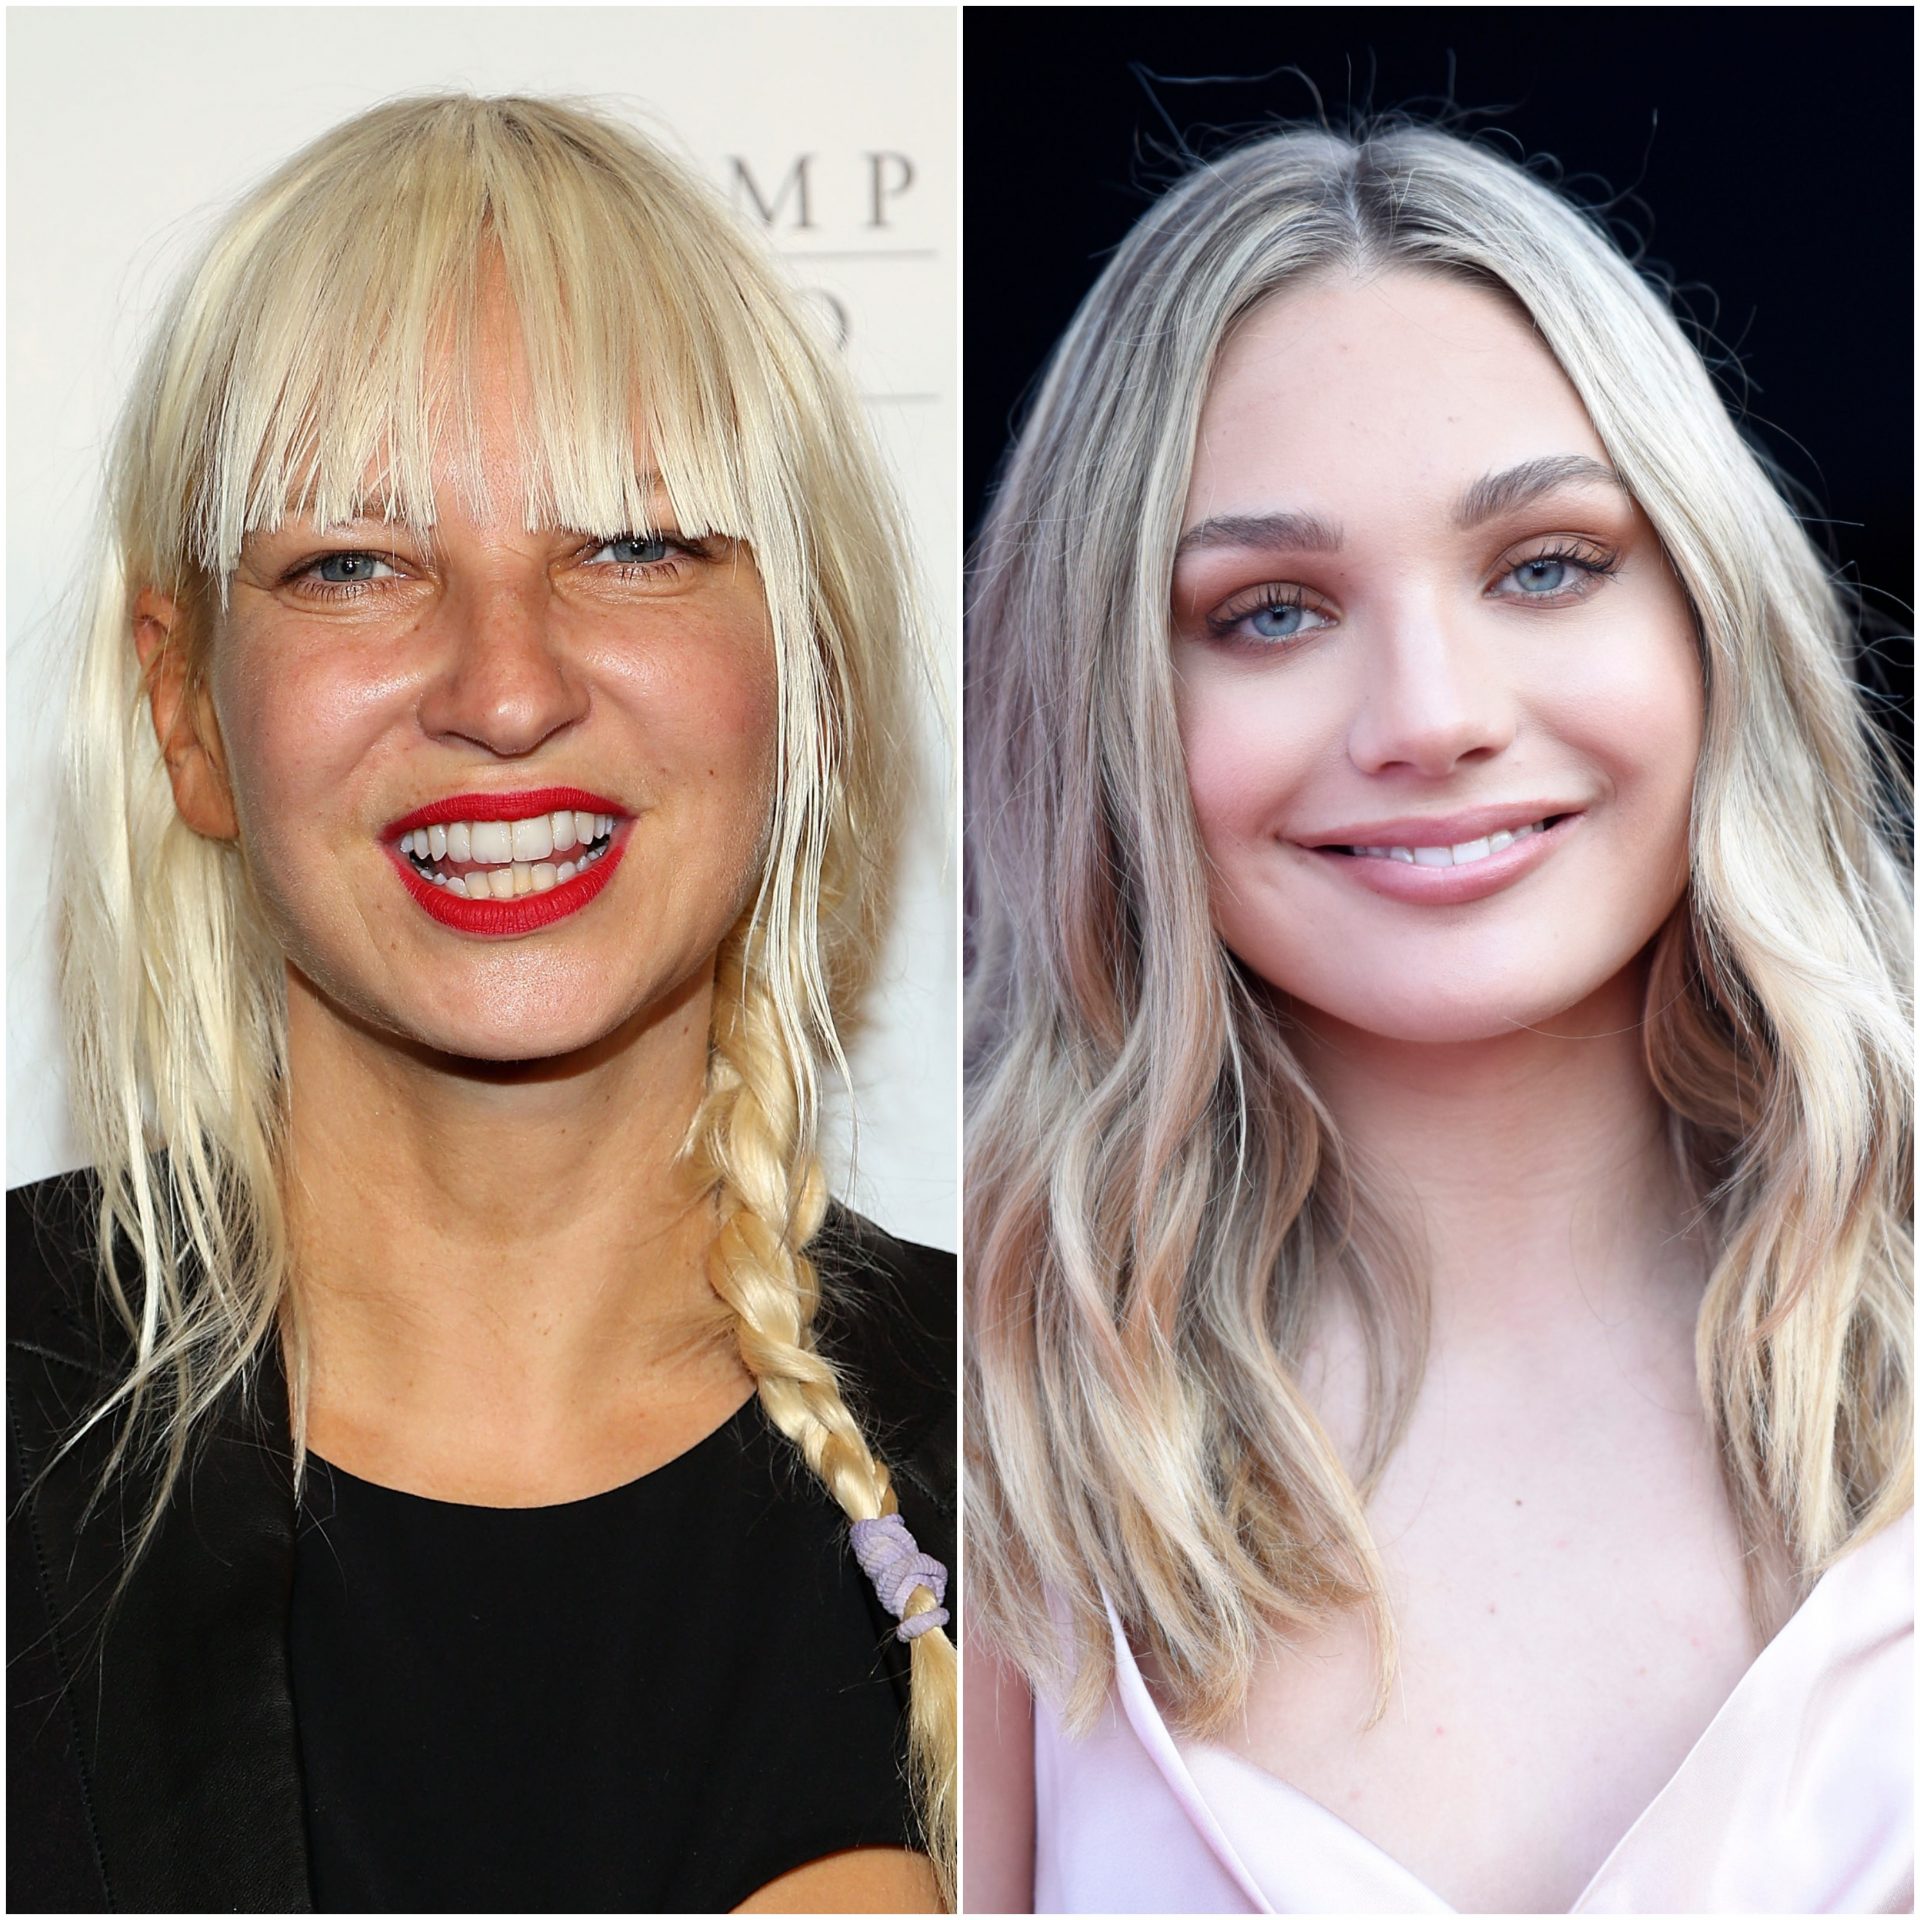 Sia Responds to Backlash for Casting Maddie Ziegler as an Autistic Character in Her Original Movie